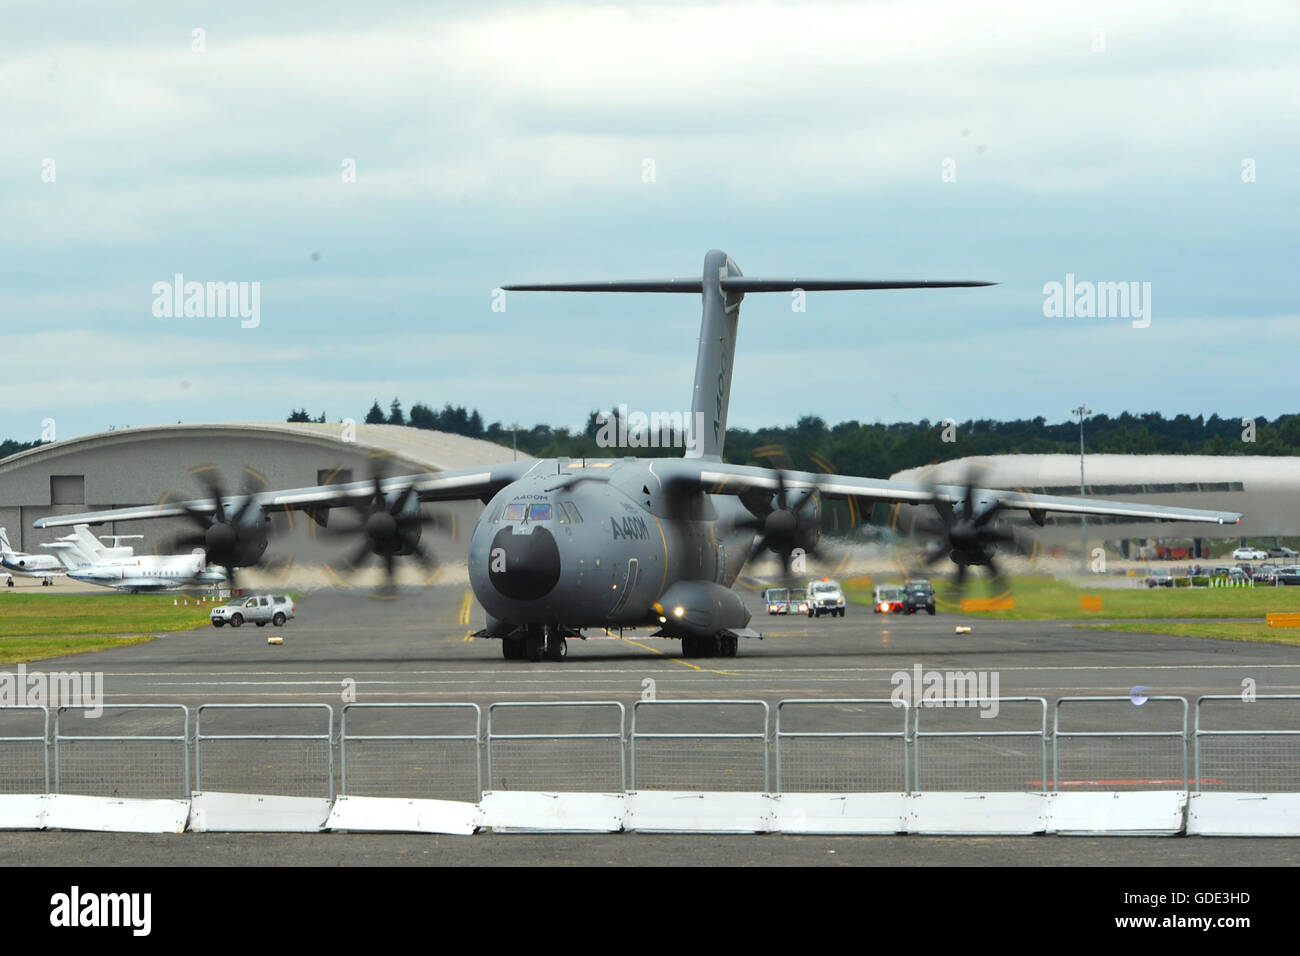 Farnborough, UK. 15th July, 2016. An Airbus A400M Atlas taxiing to take off at the Farnborough International Airshow (FIA) which took place today in Farnborough, UK.  The air show, a biannual showcase for the aviation industry, is the biggest of it's kind and attracts civil and military buyers from all over the world. trade visitors are normally in excess of 100,000 people. The show runs until July 17. Credit:  Michael Preston/Alamy Live News Stock Photo